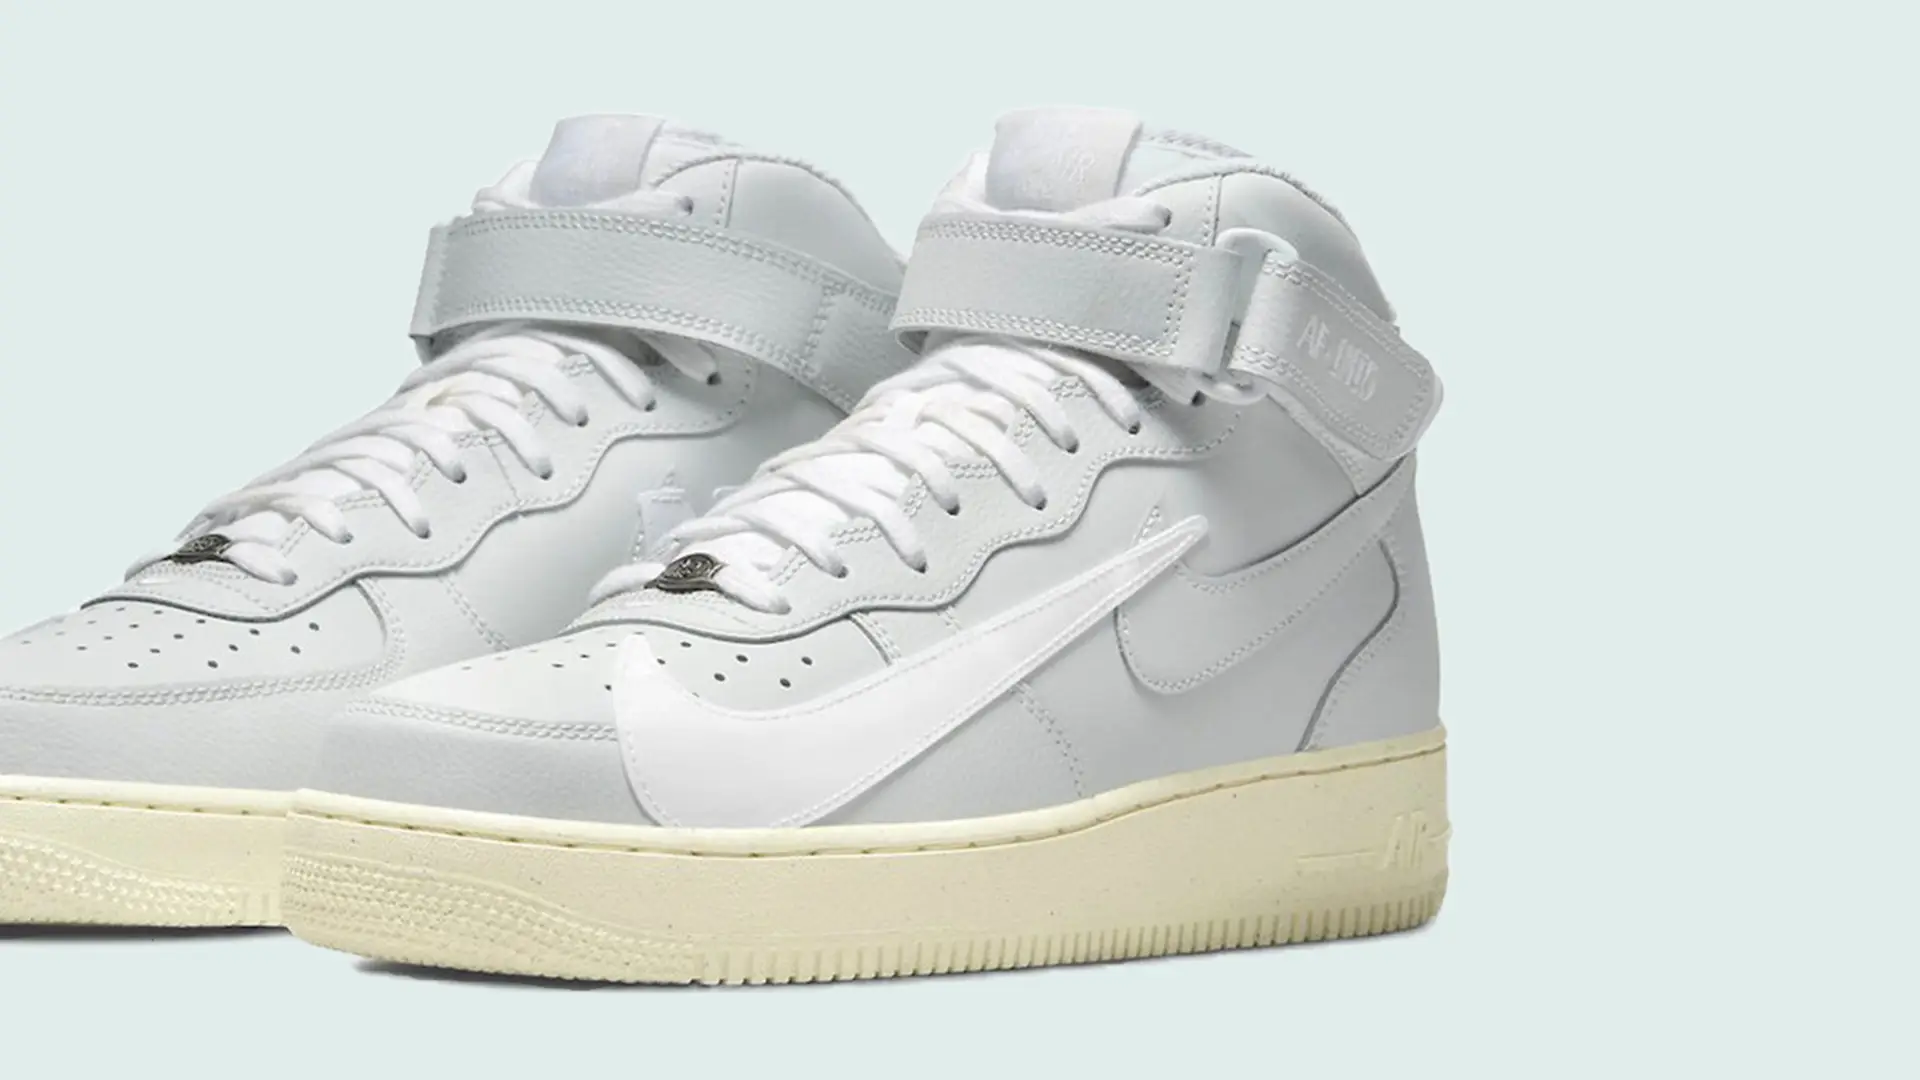 Oversized Details Decorate the Nike Air Force 1 Mid 